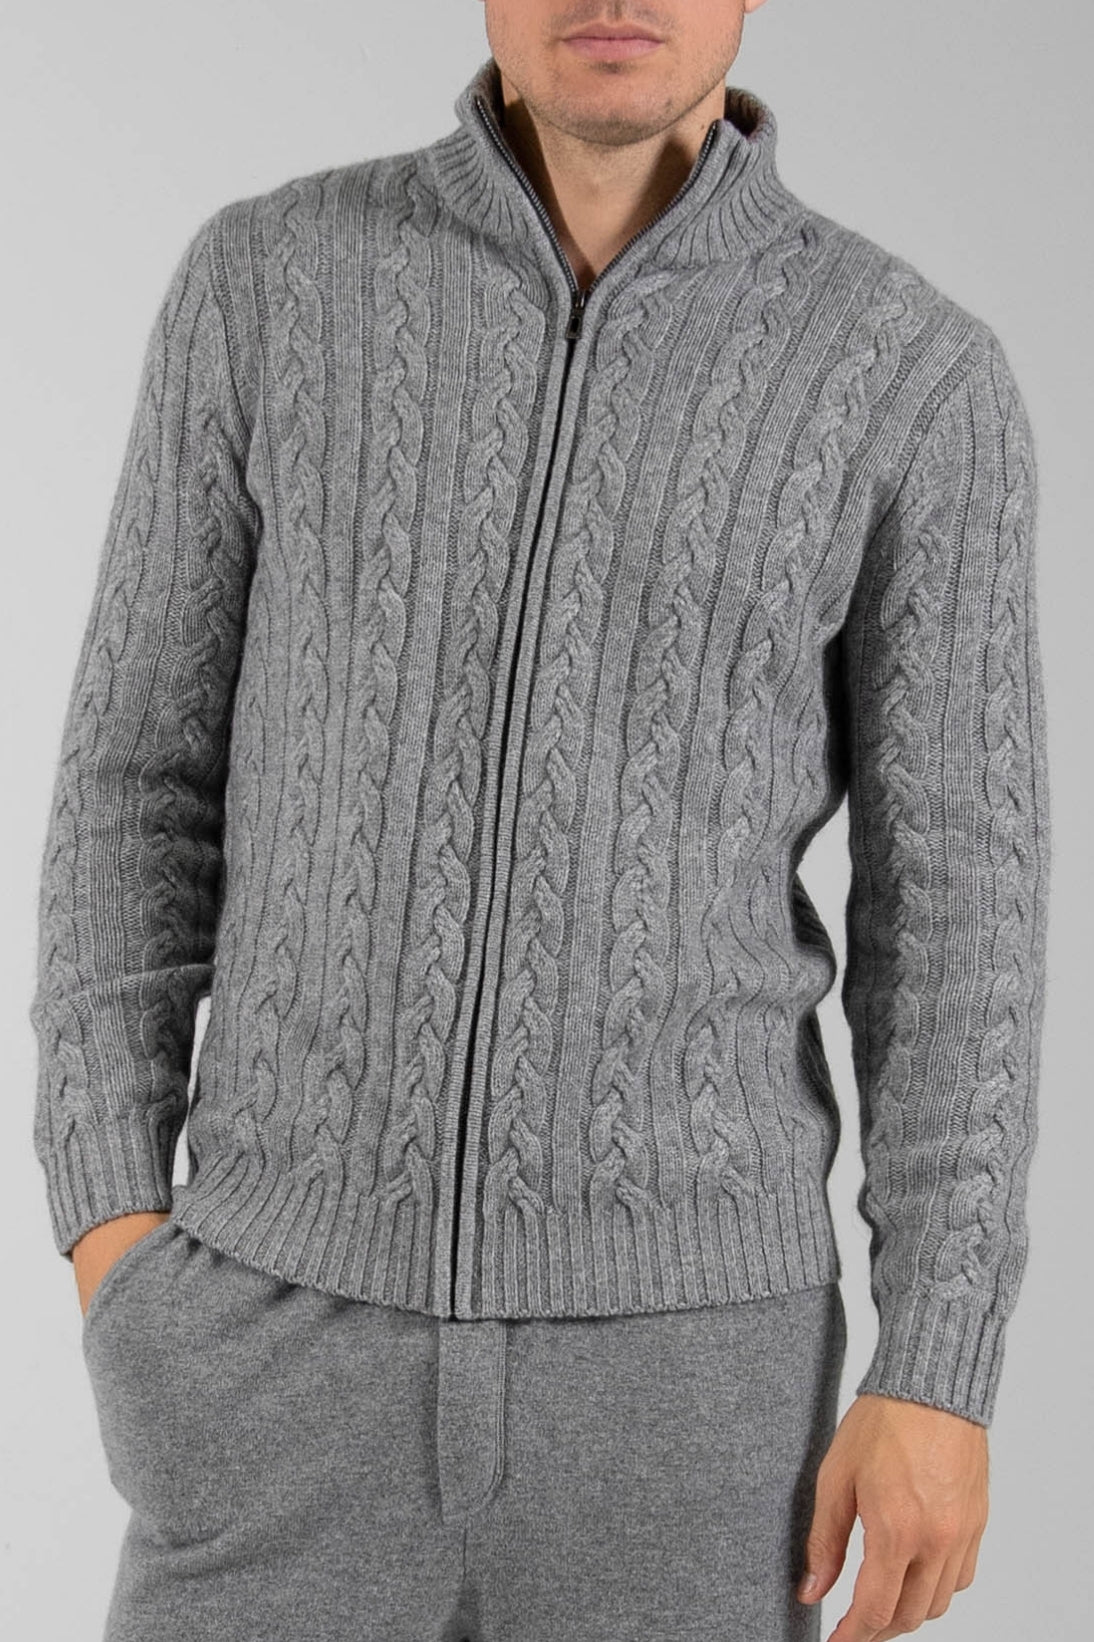 Gant Full Zip Cardigan – Stow Country Clothing also trading as Mangan and  Webb ltd